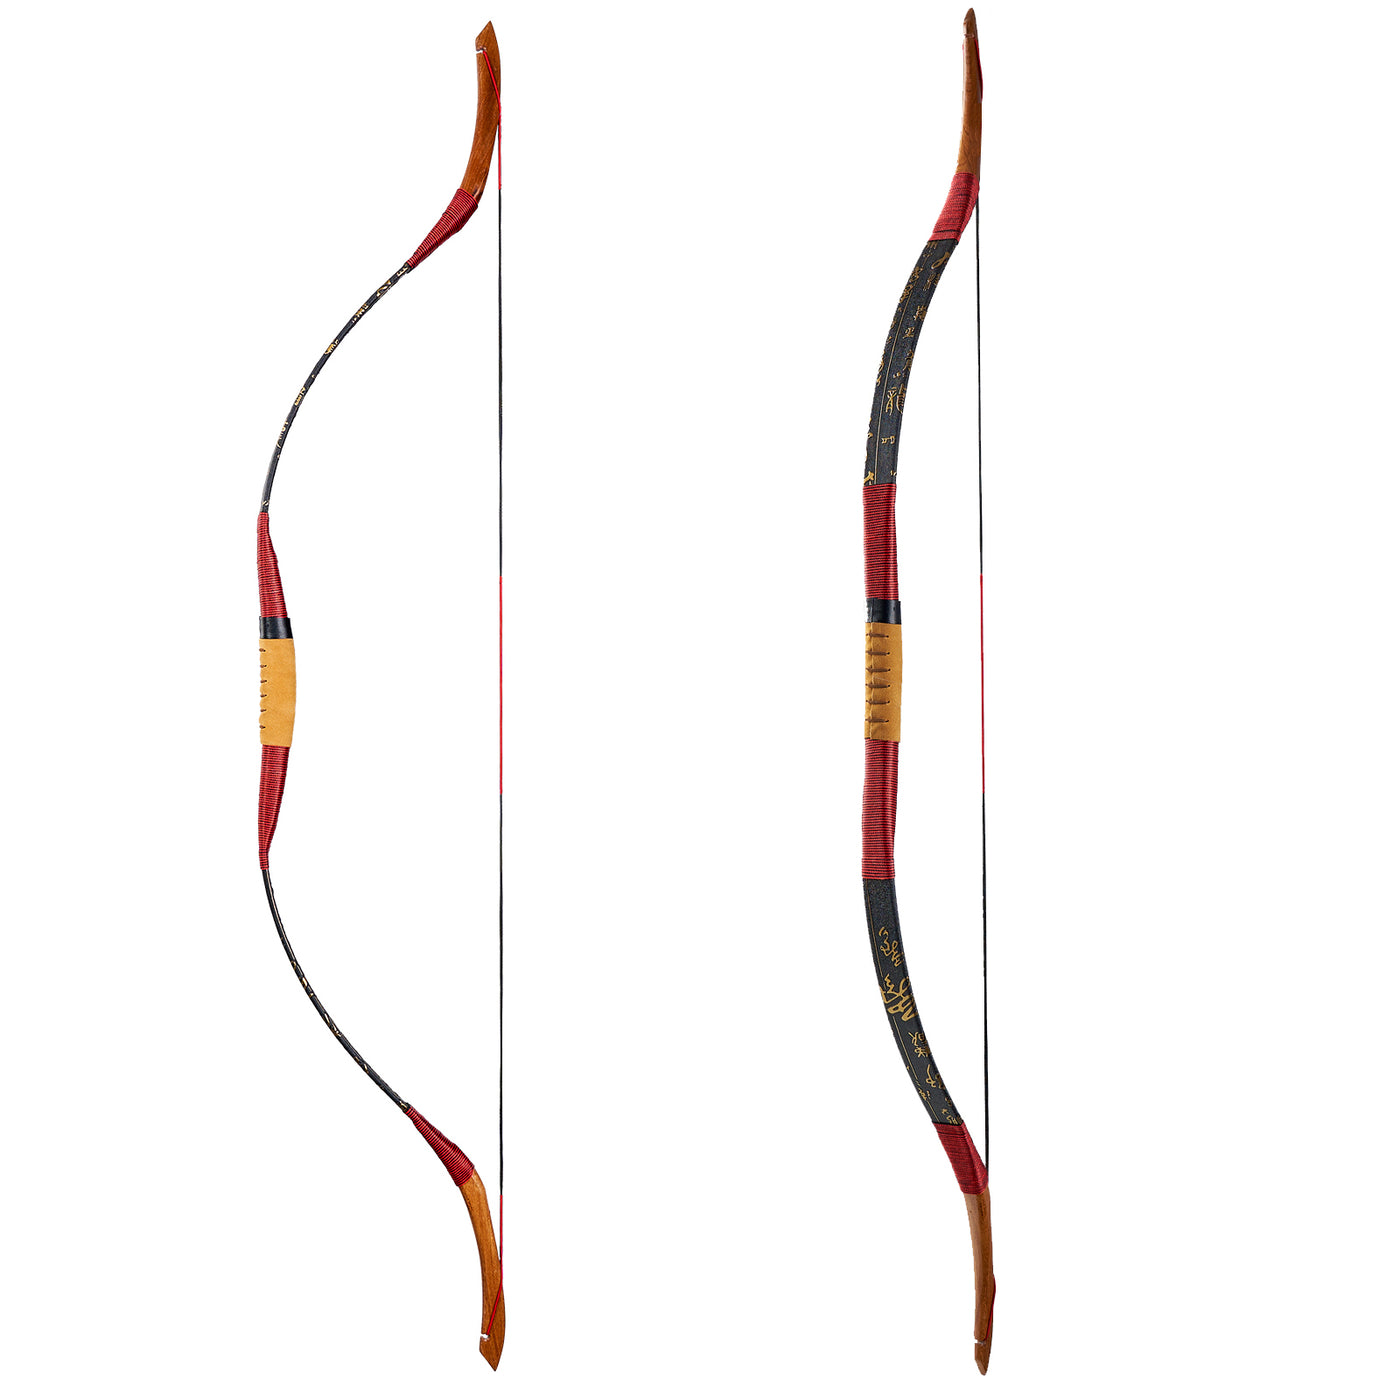 48"/52"/56" Dugu Qieluo Traditional Archery Horse Recurve Bow Wood Mongolian Hunting Target 15-50 lbs